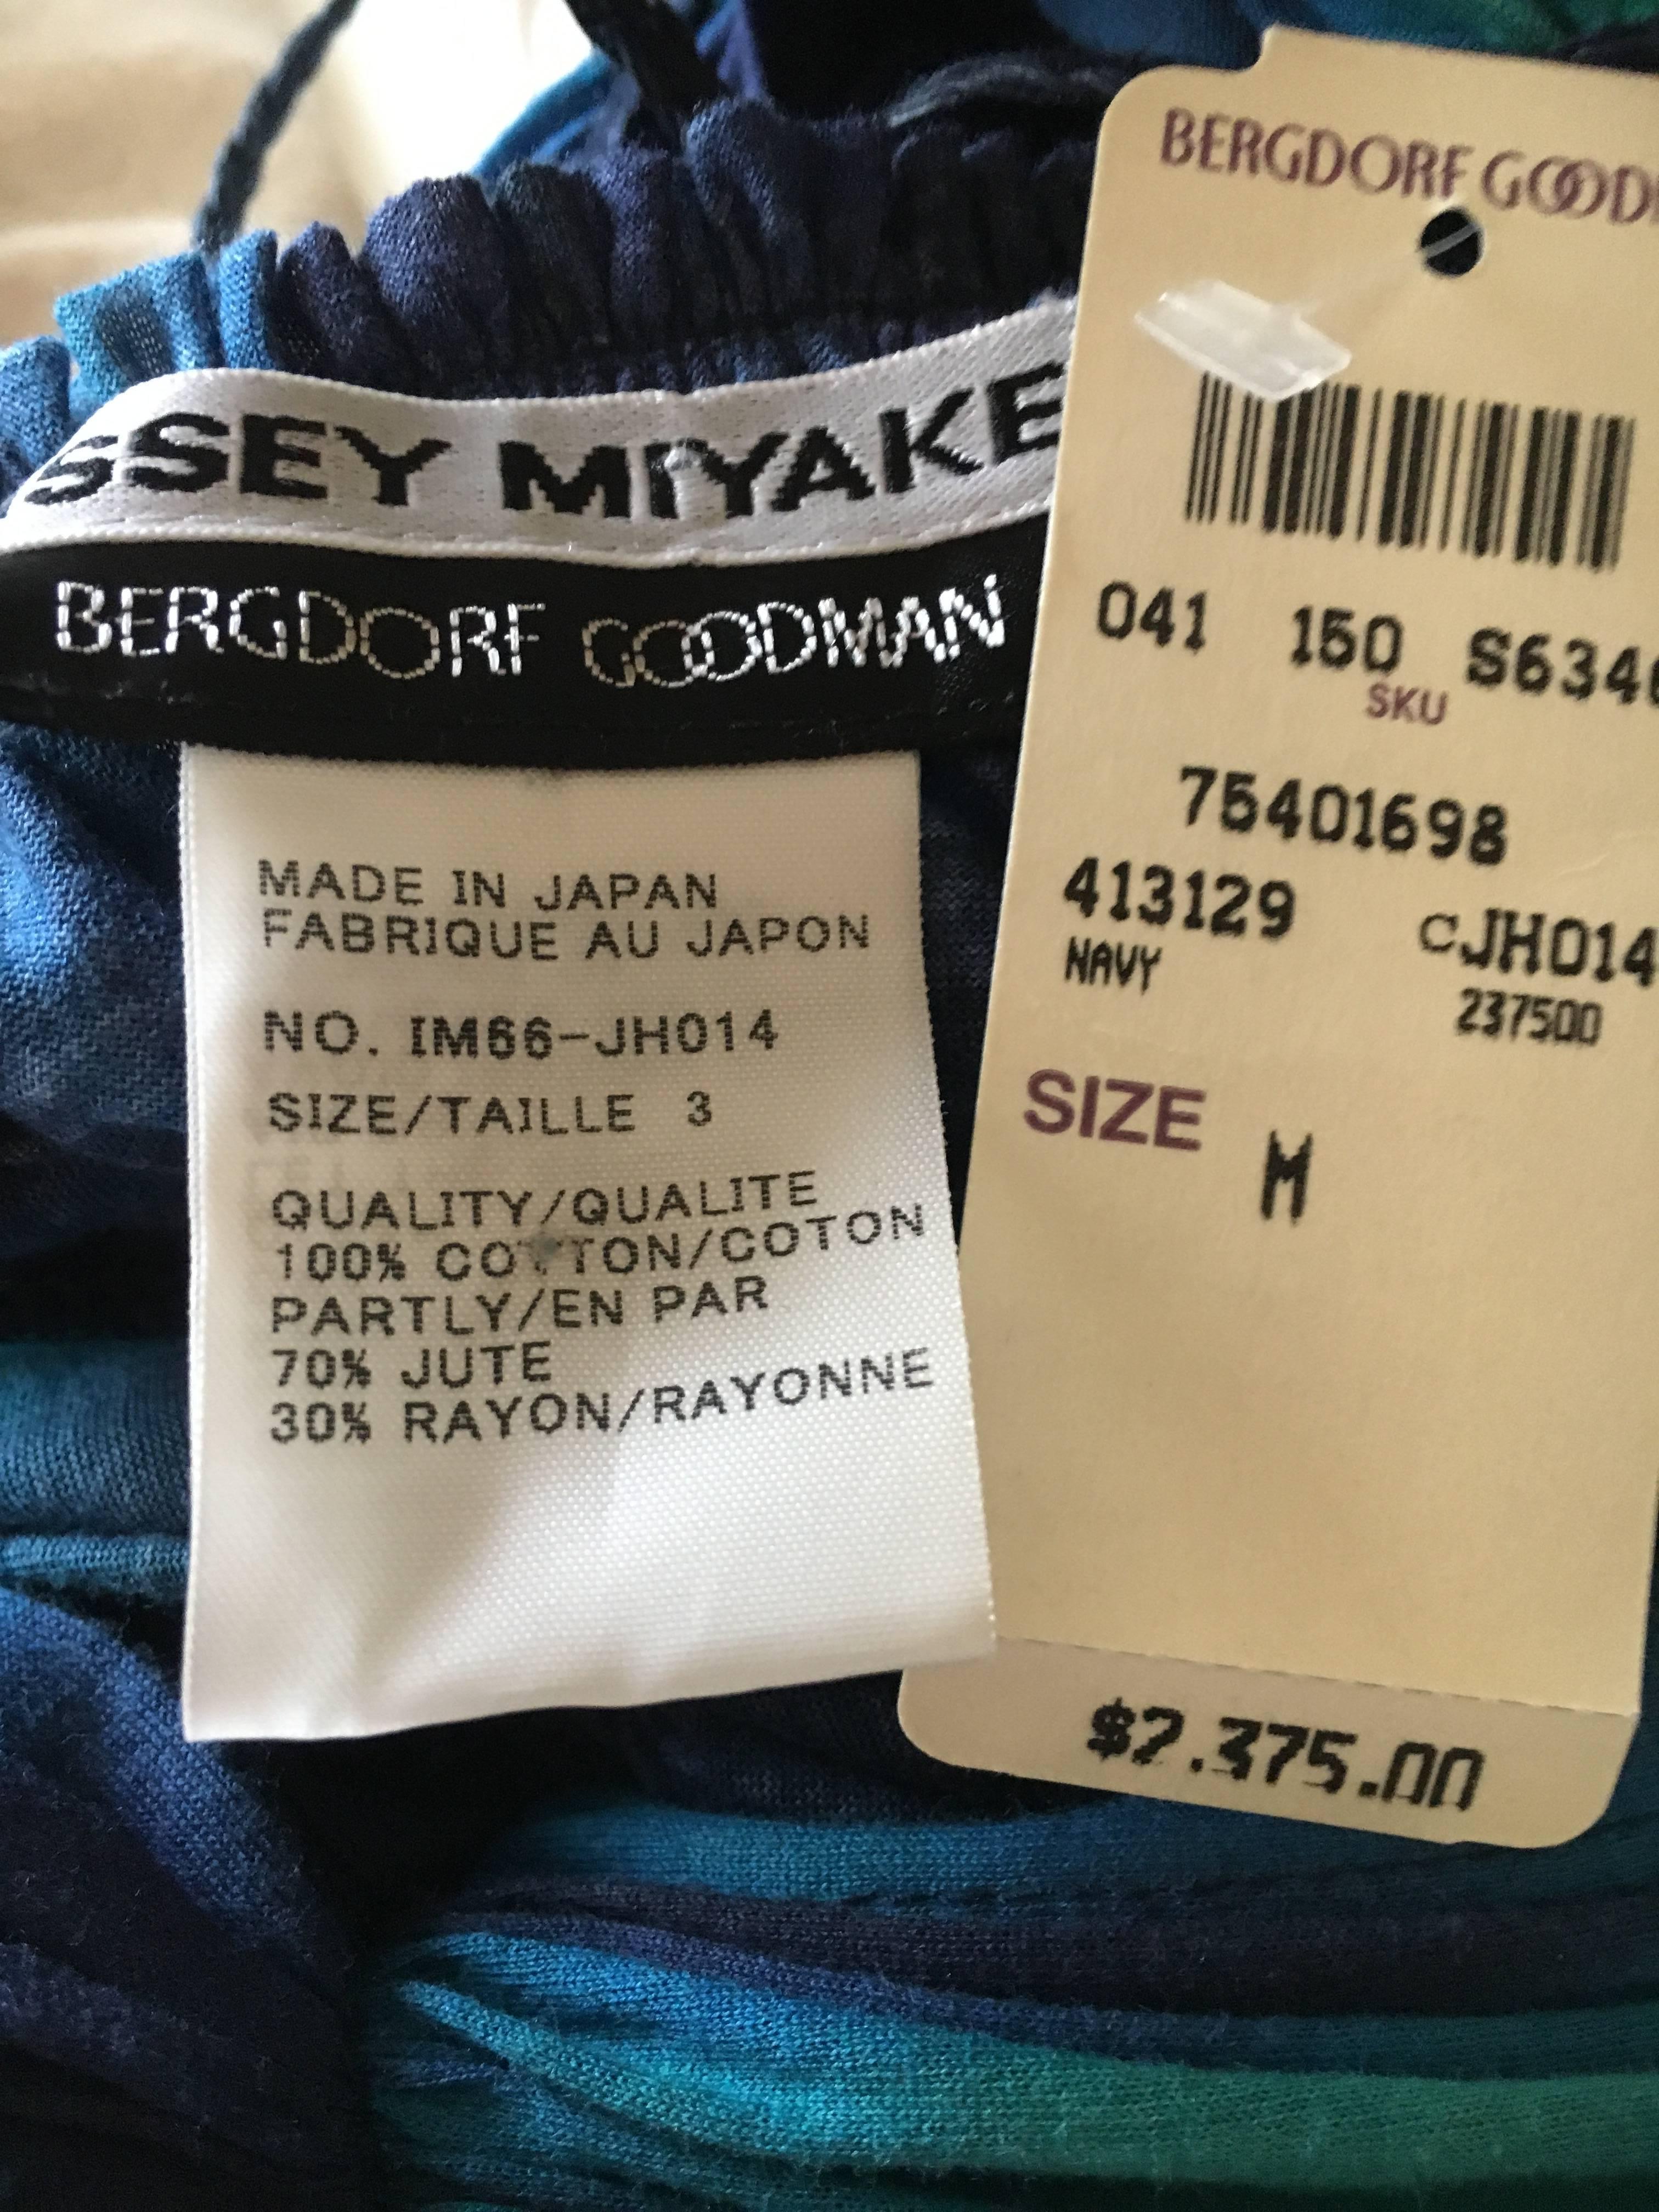 Issey Miyake Bergdorf Goodman 1990's Tie Dye Ruched Dress New with Tags 2